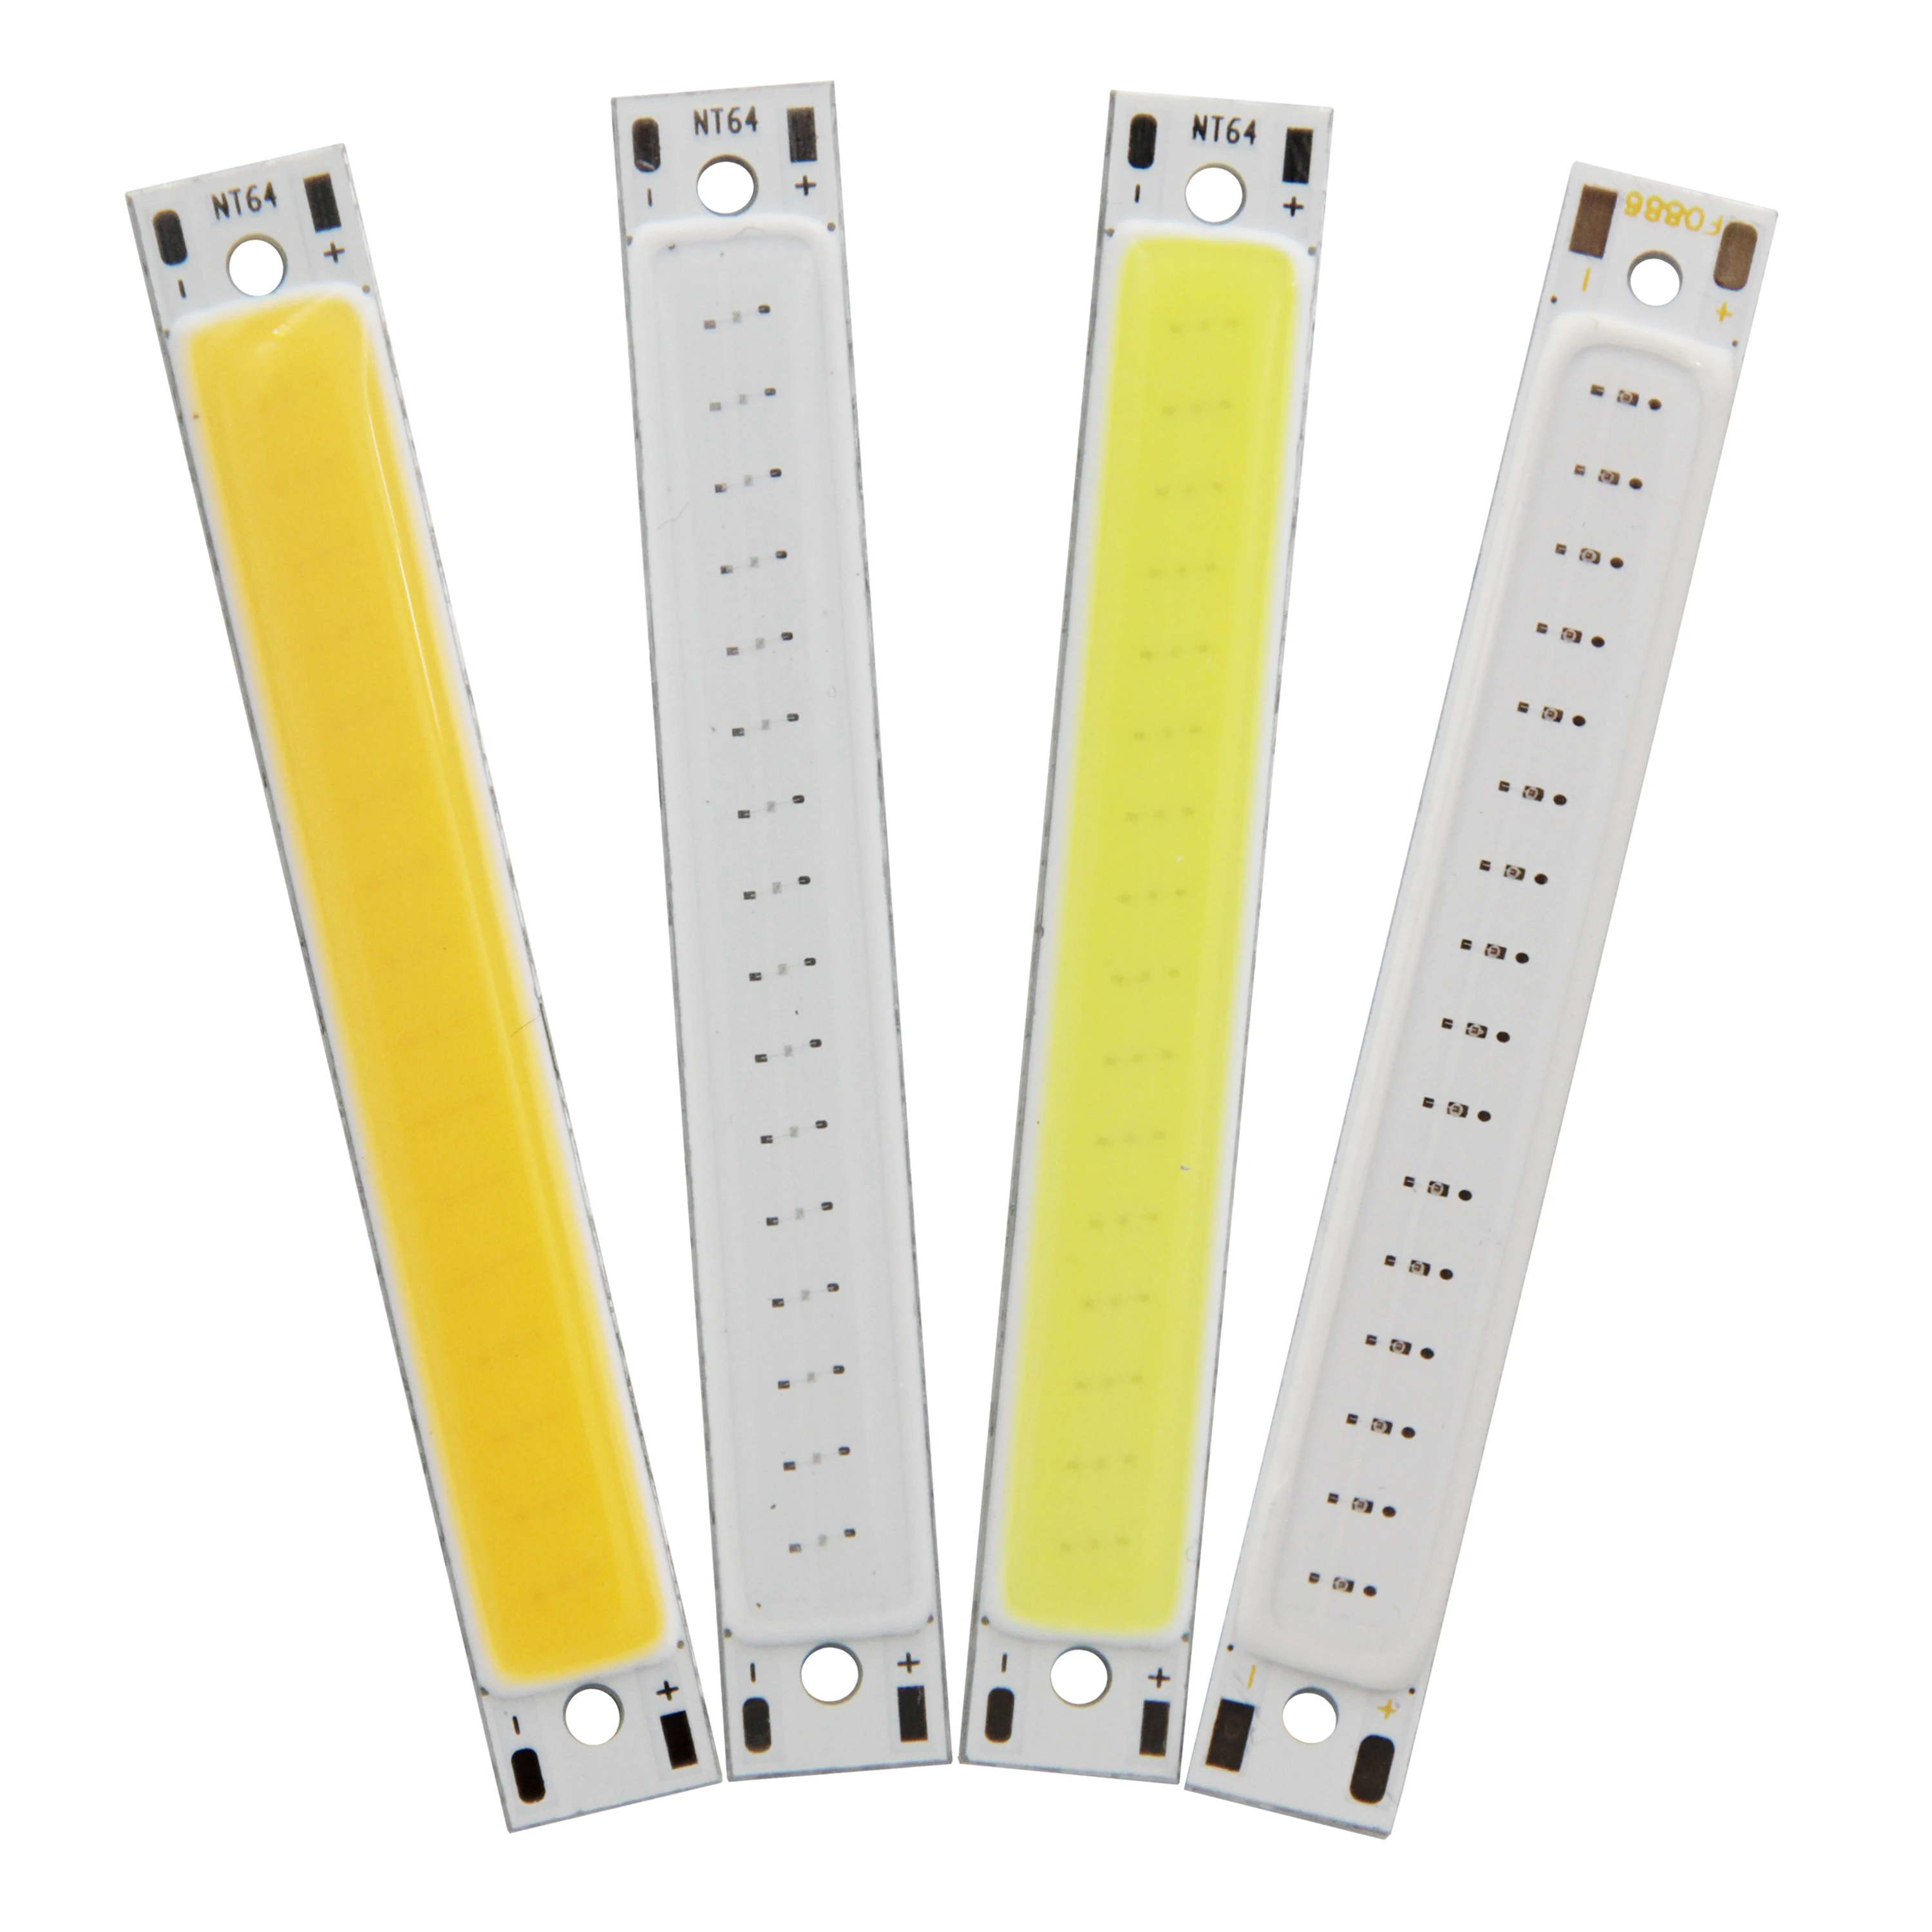 hot sale 3V 3.7V DC 60mm 8mm LED COB Strip 1.5W 3W Warm Cold White Blue Red COB LED light source for DIY Bicycle work lamp